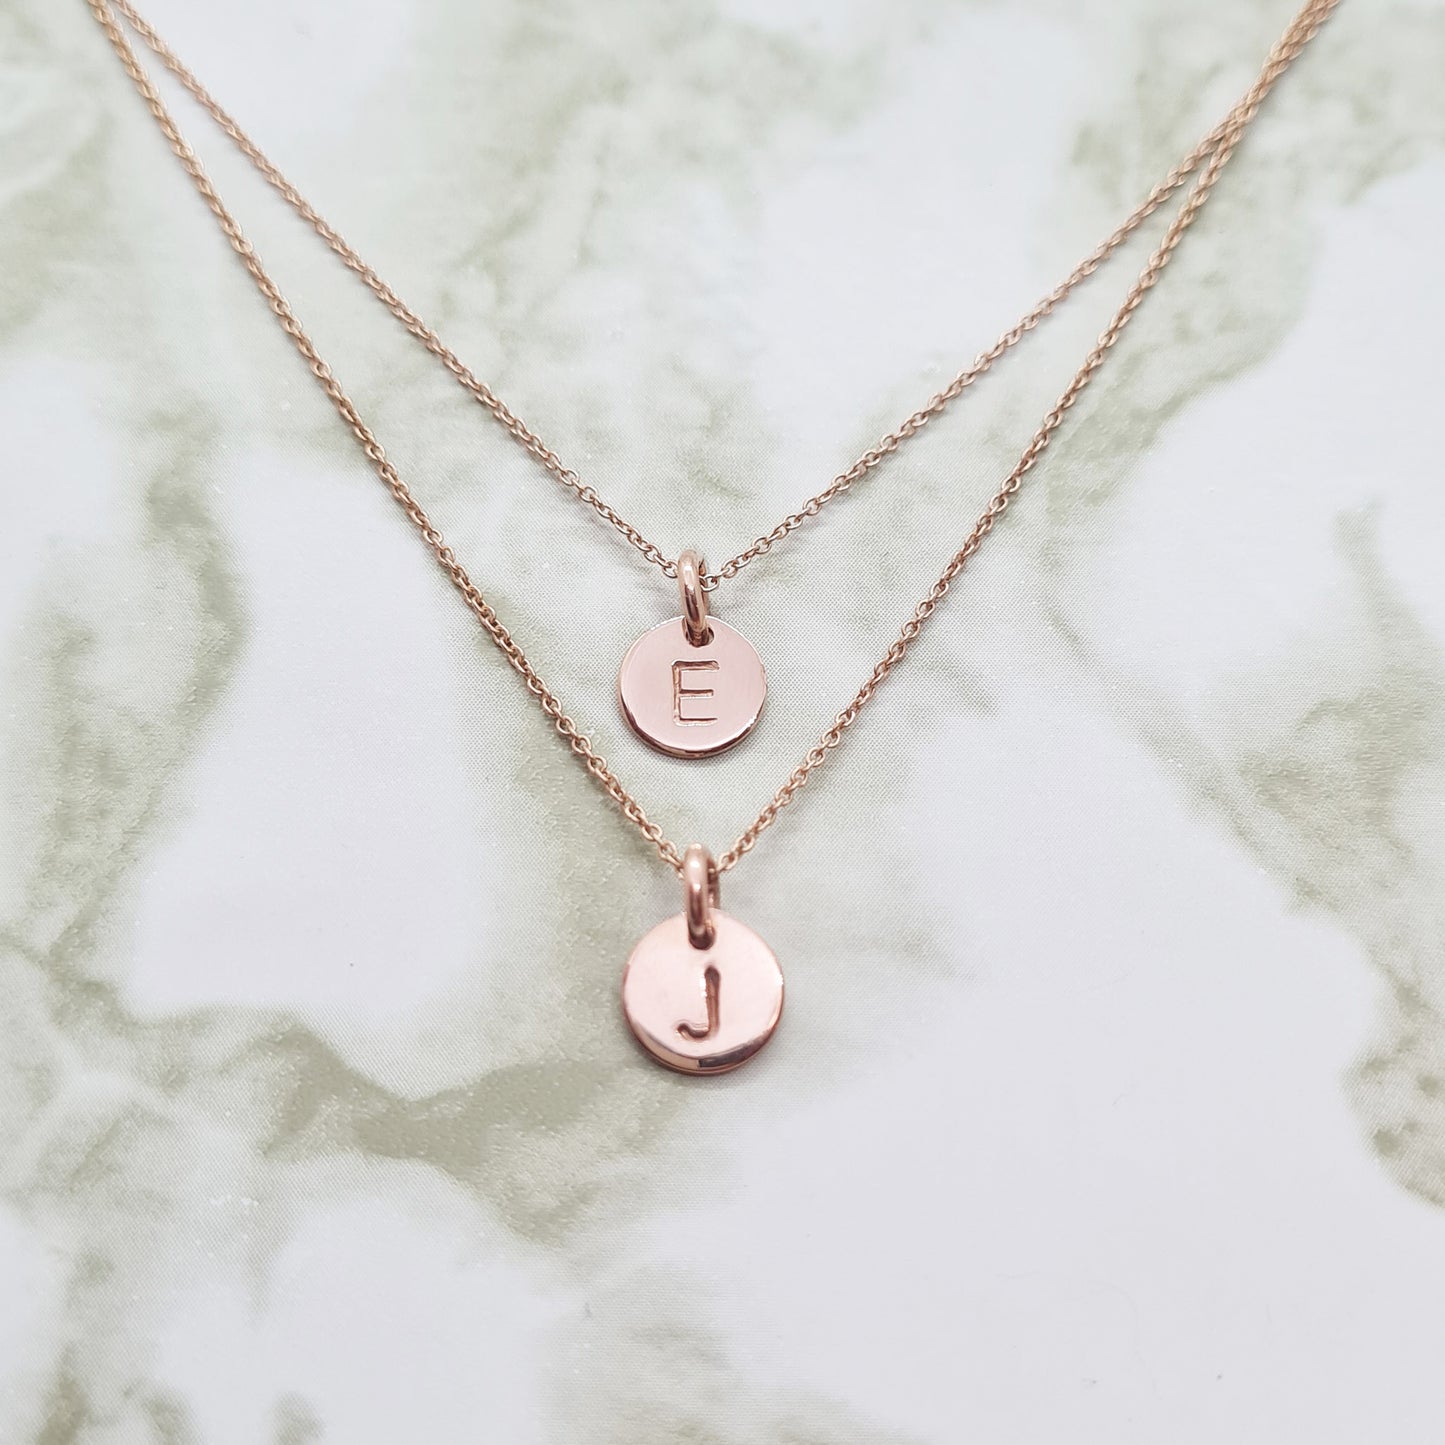 Medallion Disc Long Chain Necklace - Rose Gold